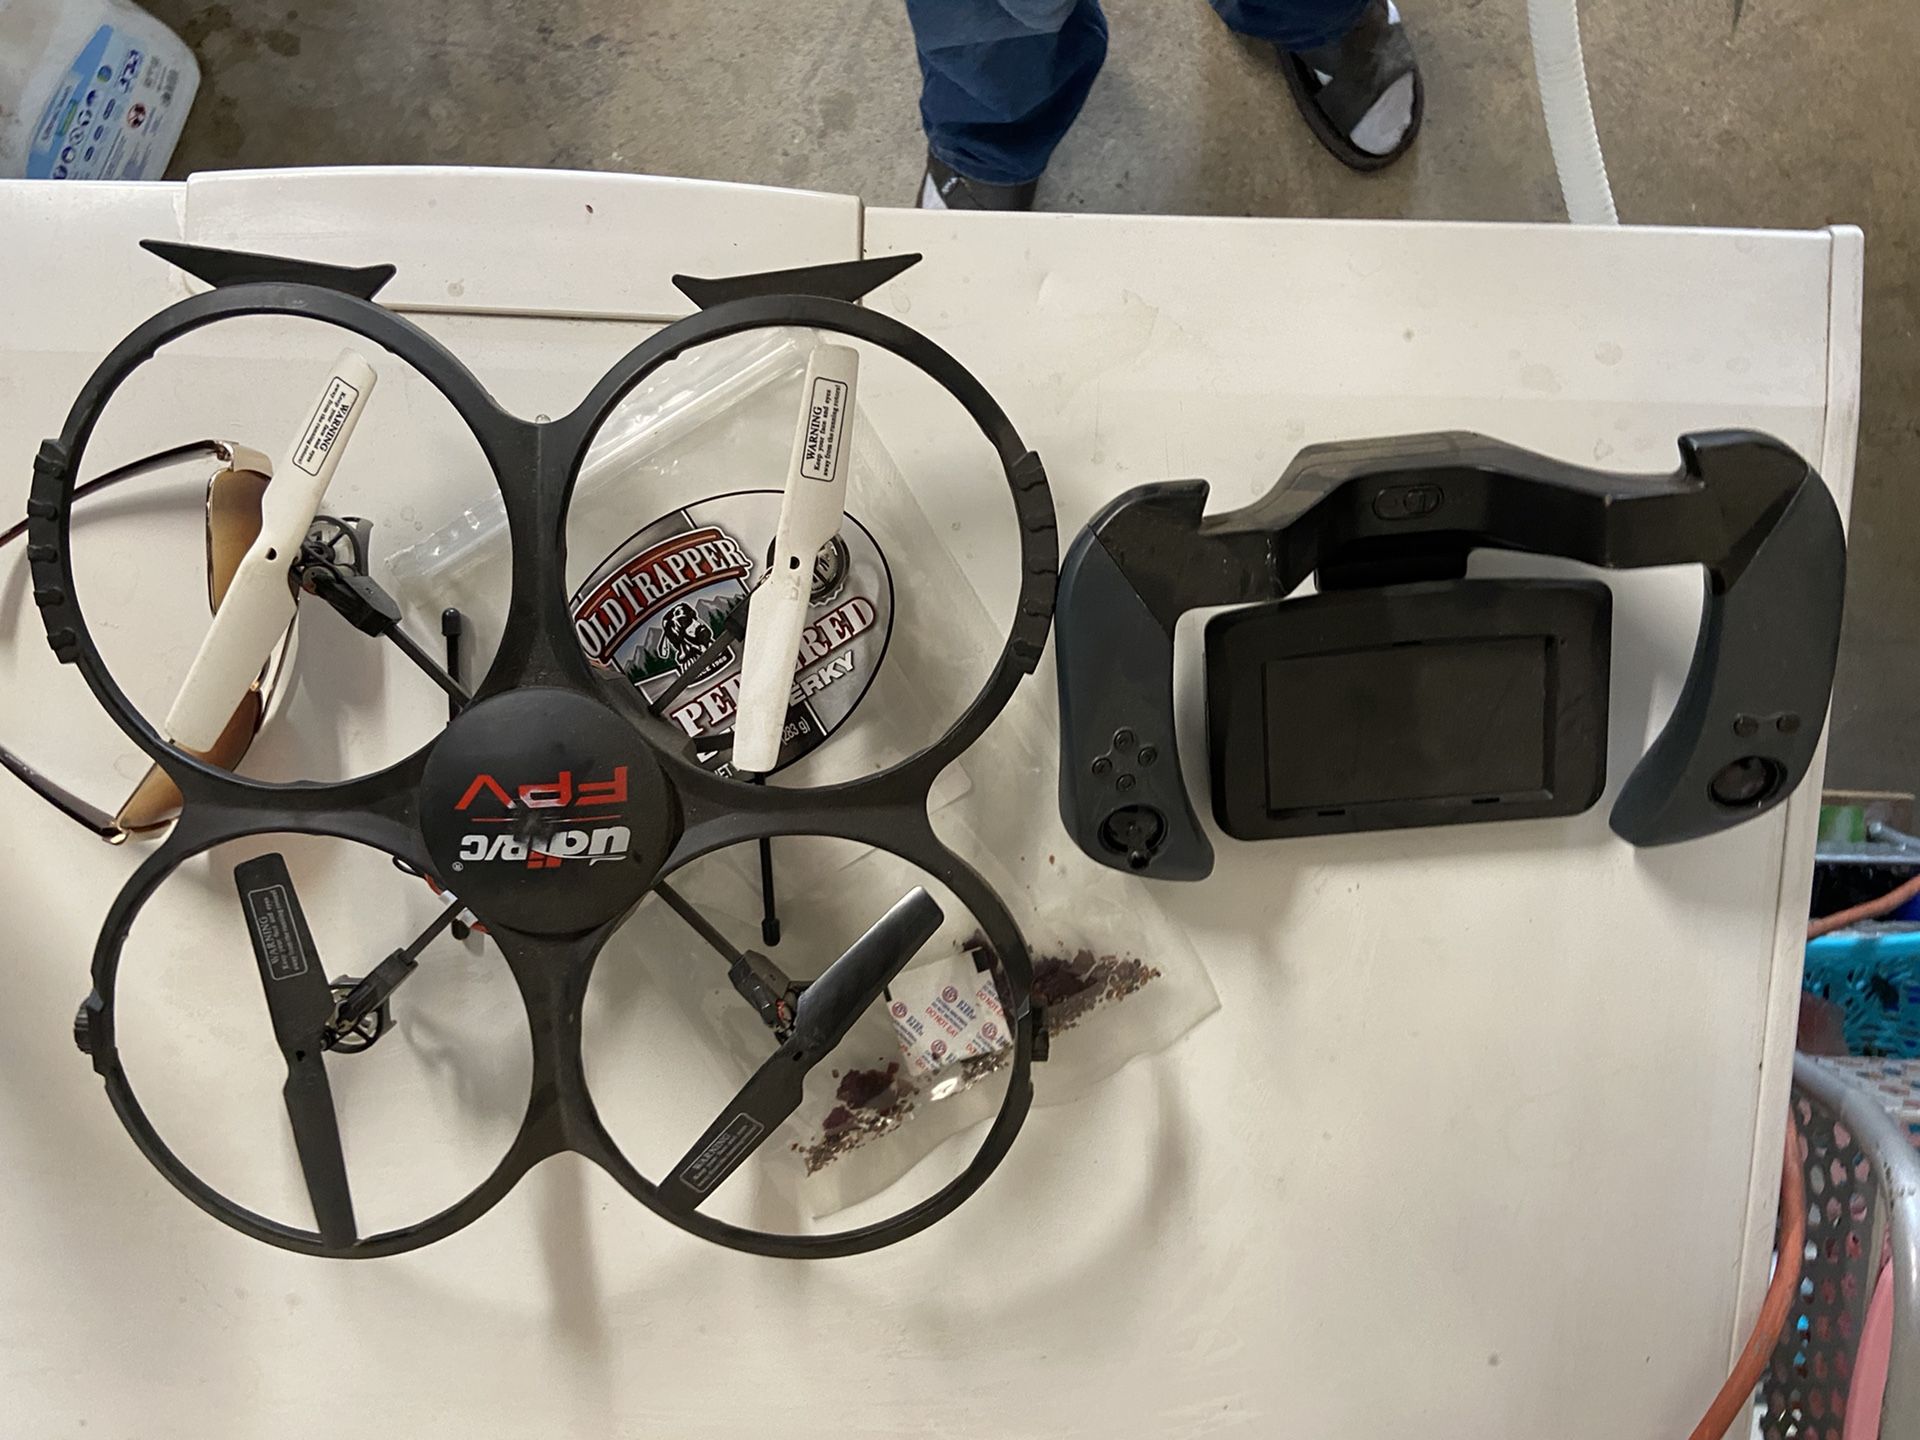 Drone works with LCD screen remote control.